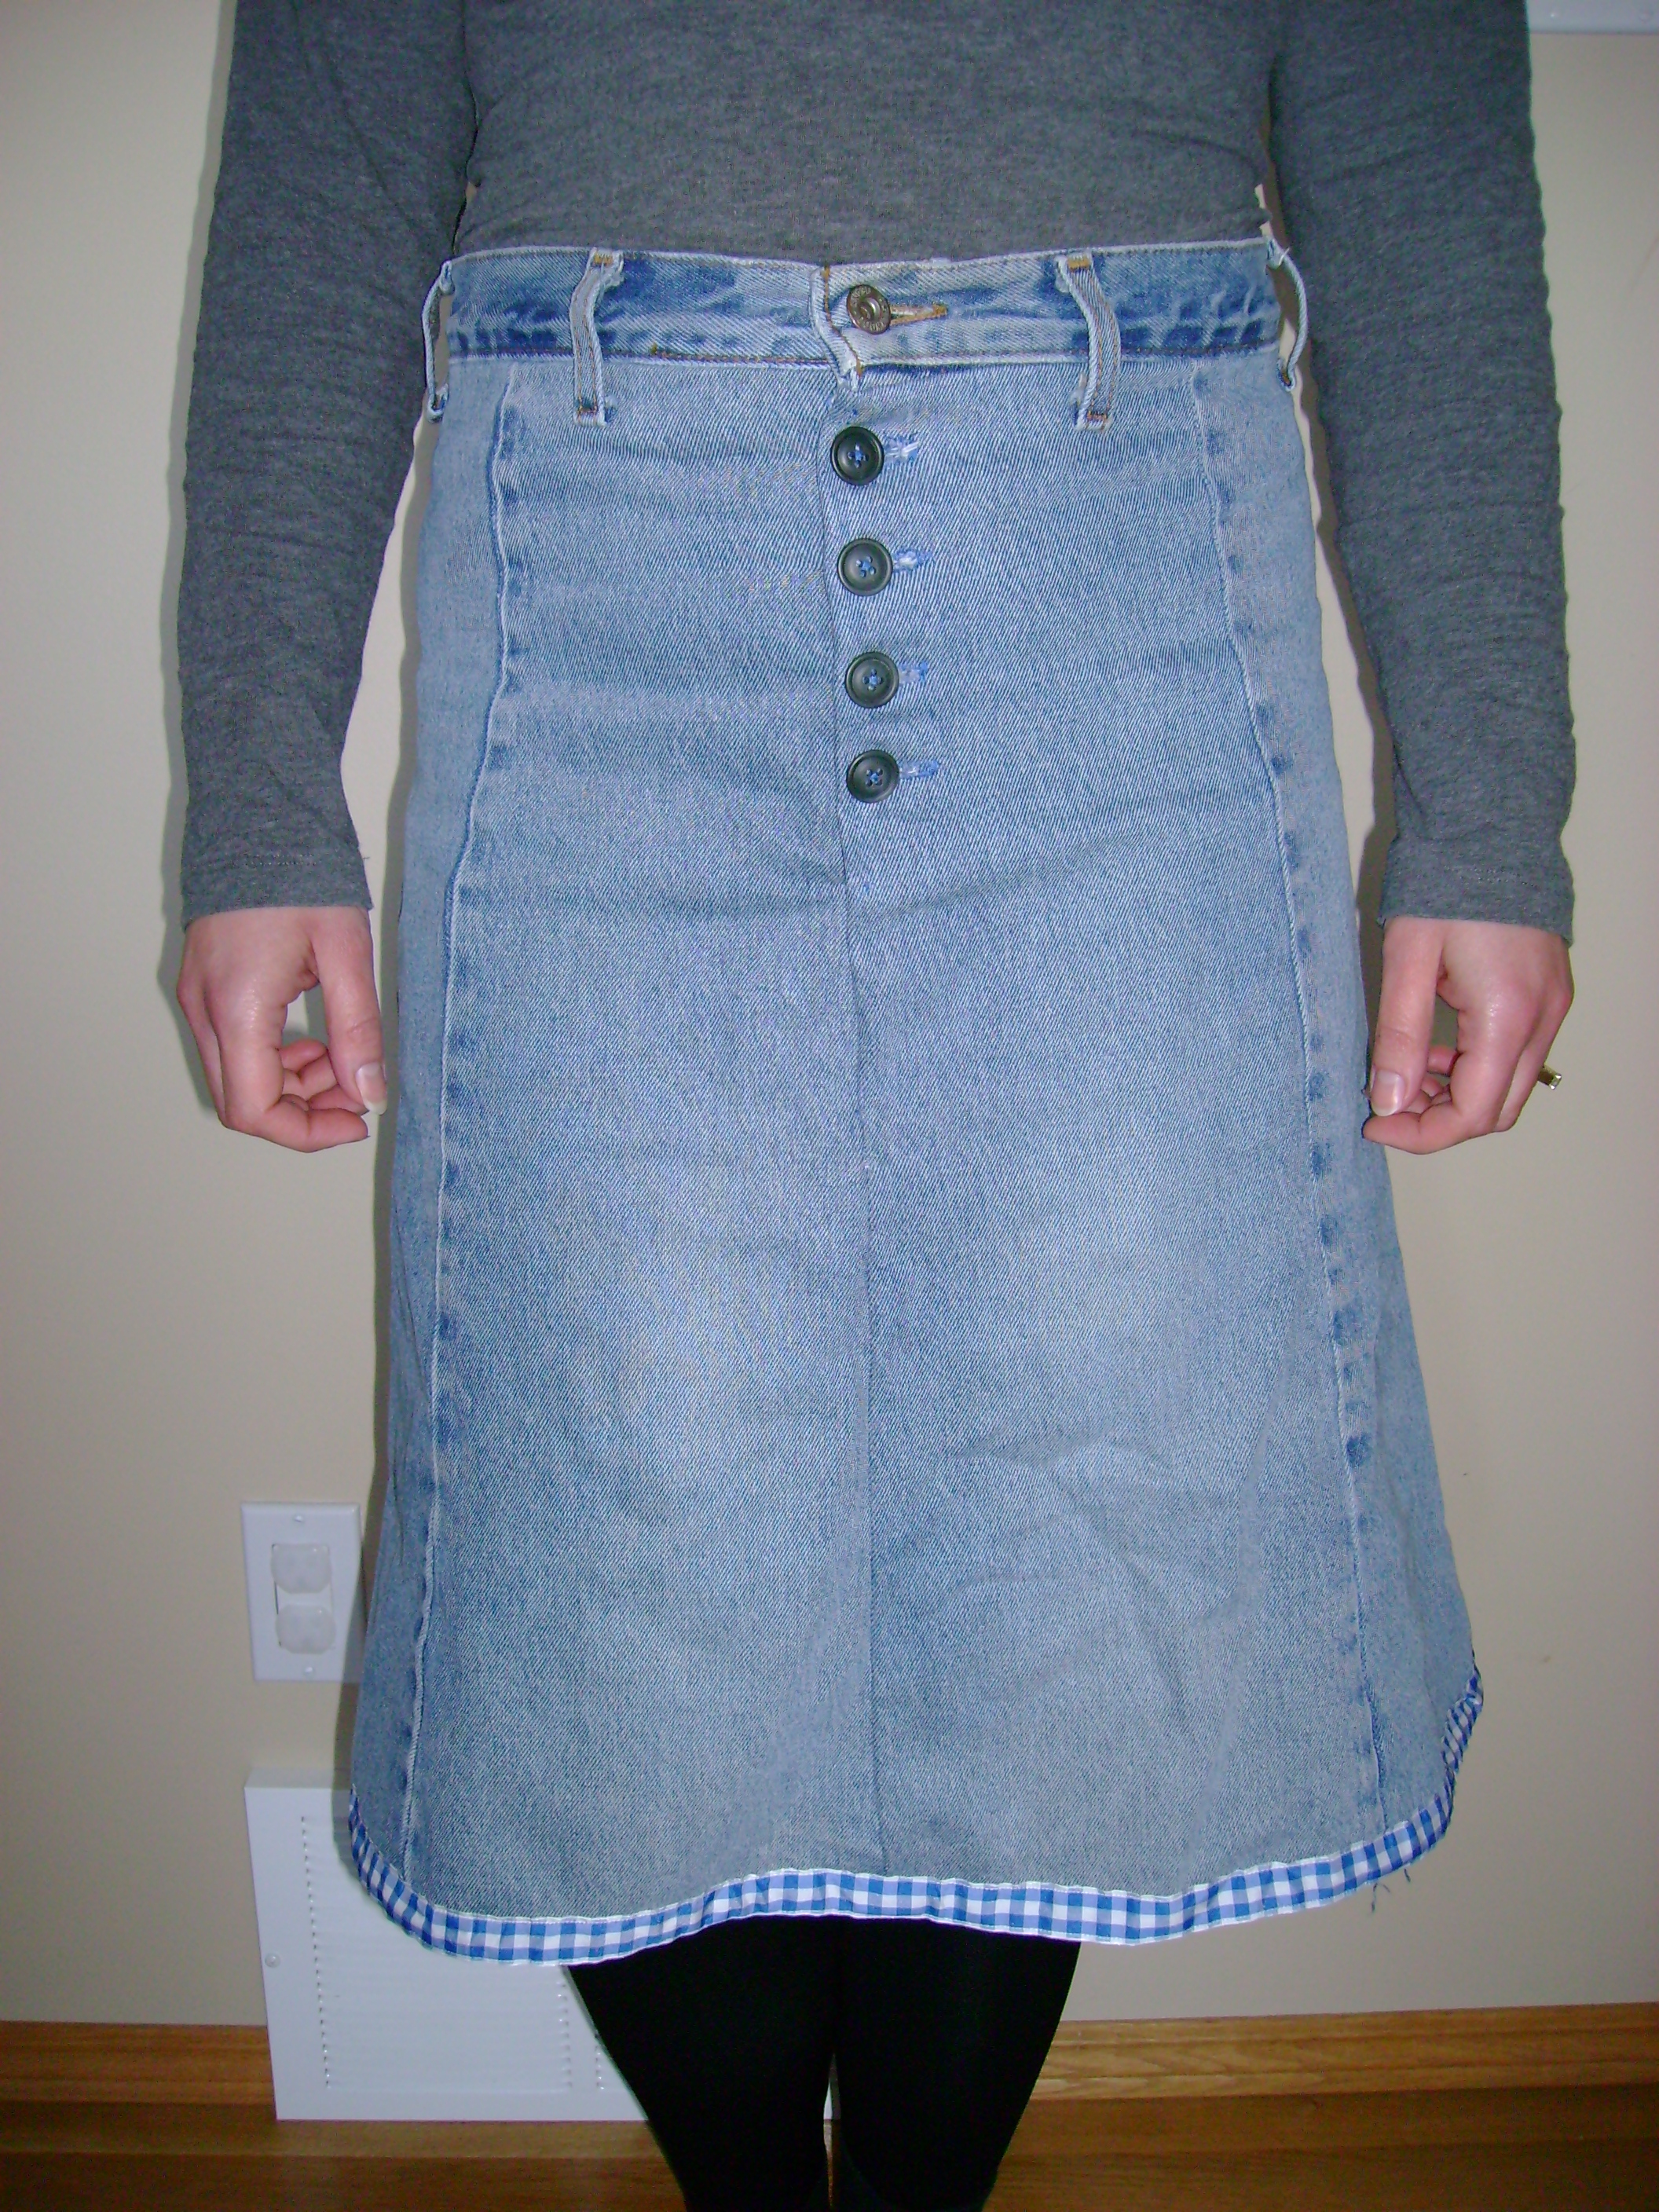 Recycled jean skirt – Sewing Projects | BurdaStyle.com